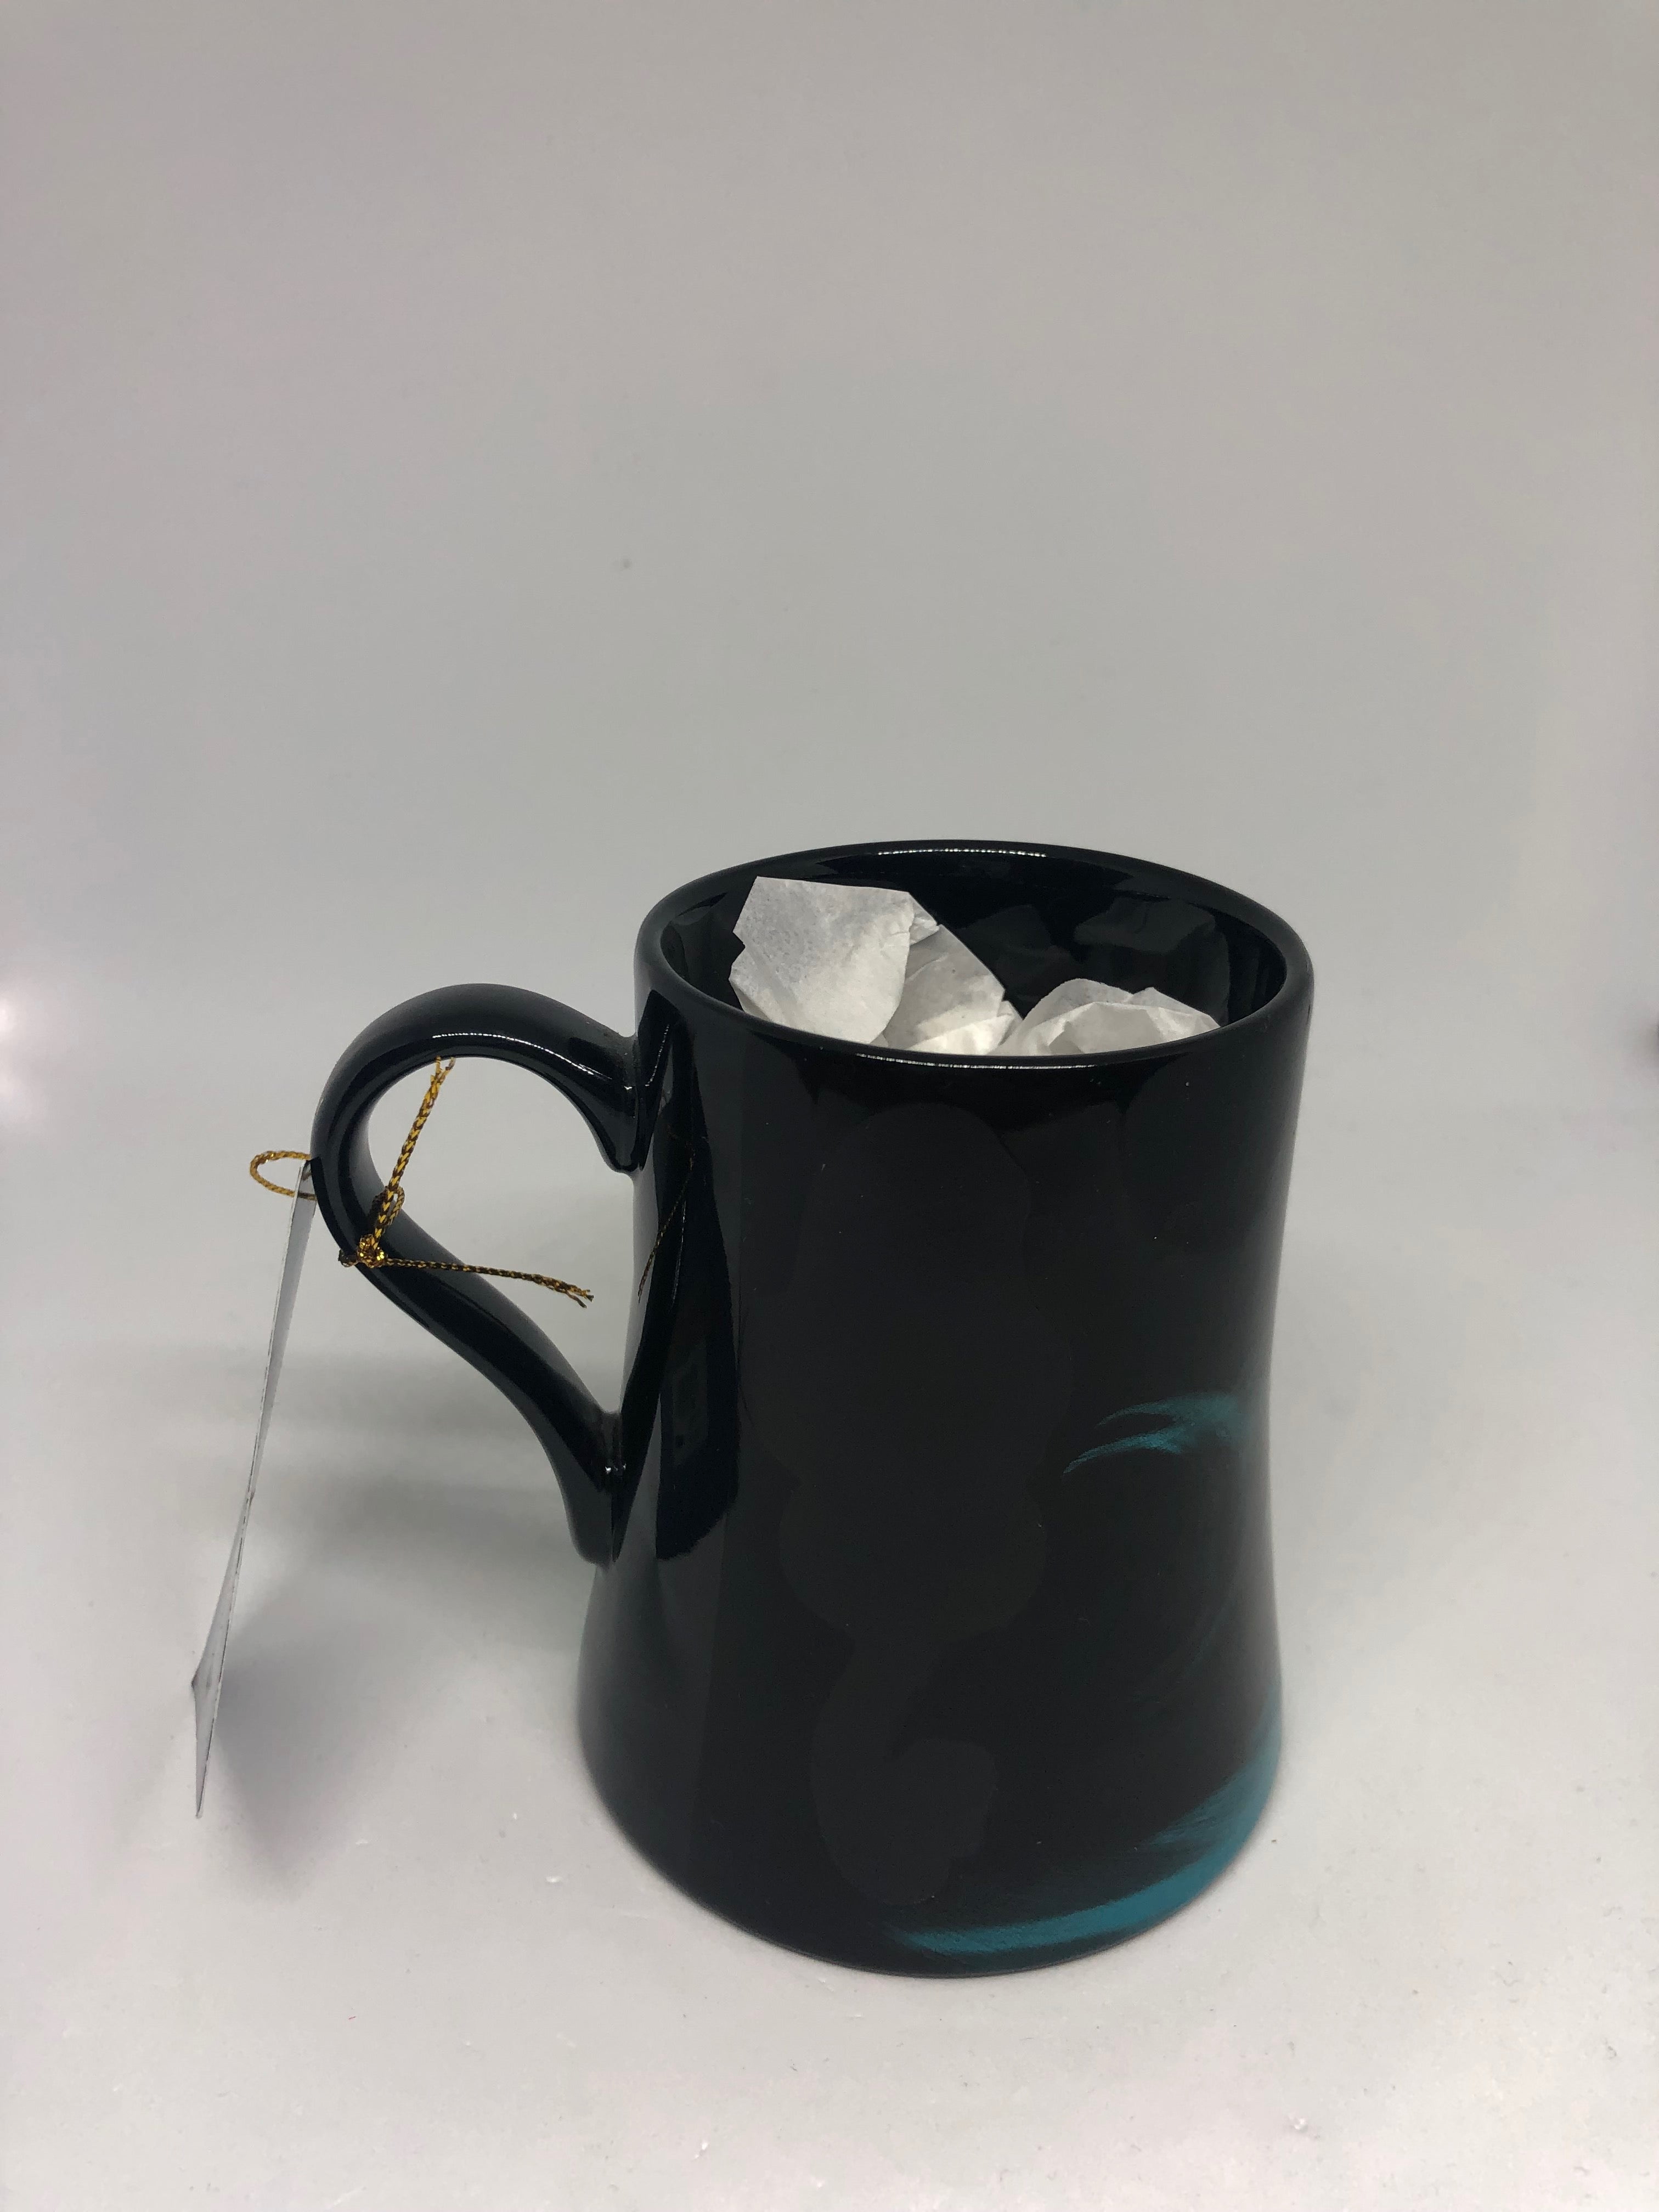 Learn About the Universe With This Unique Heat Reactive Mug– My Modern Met  Store